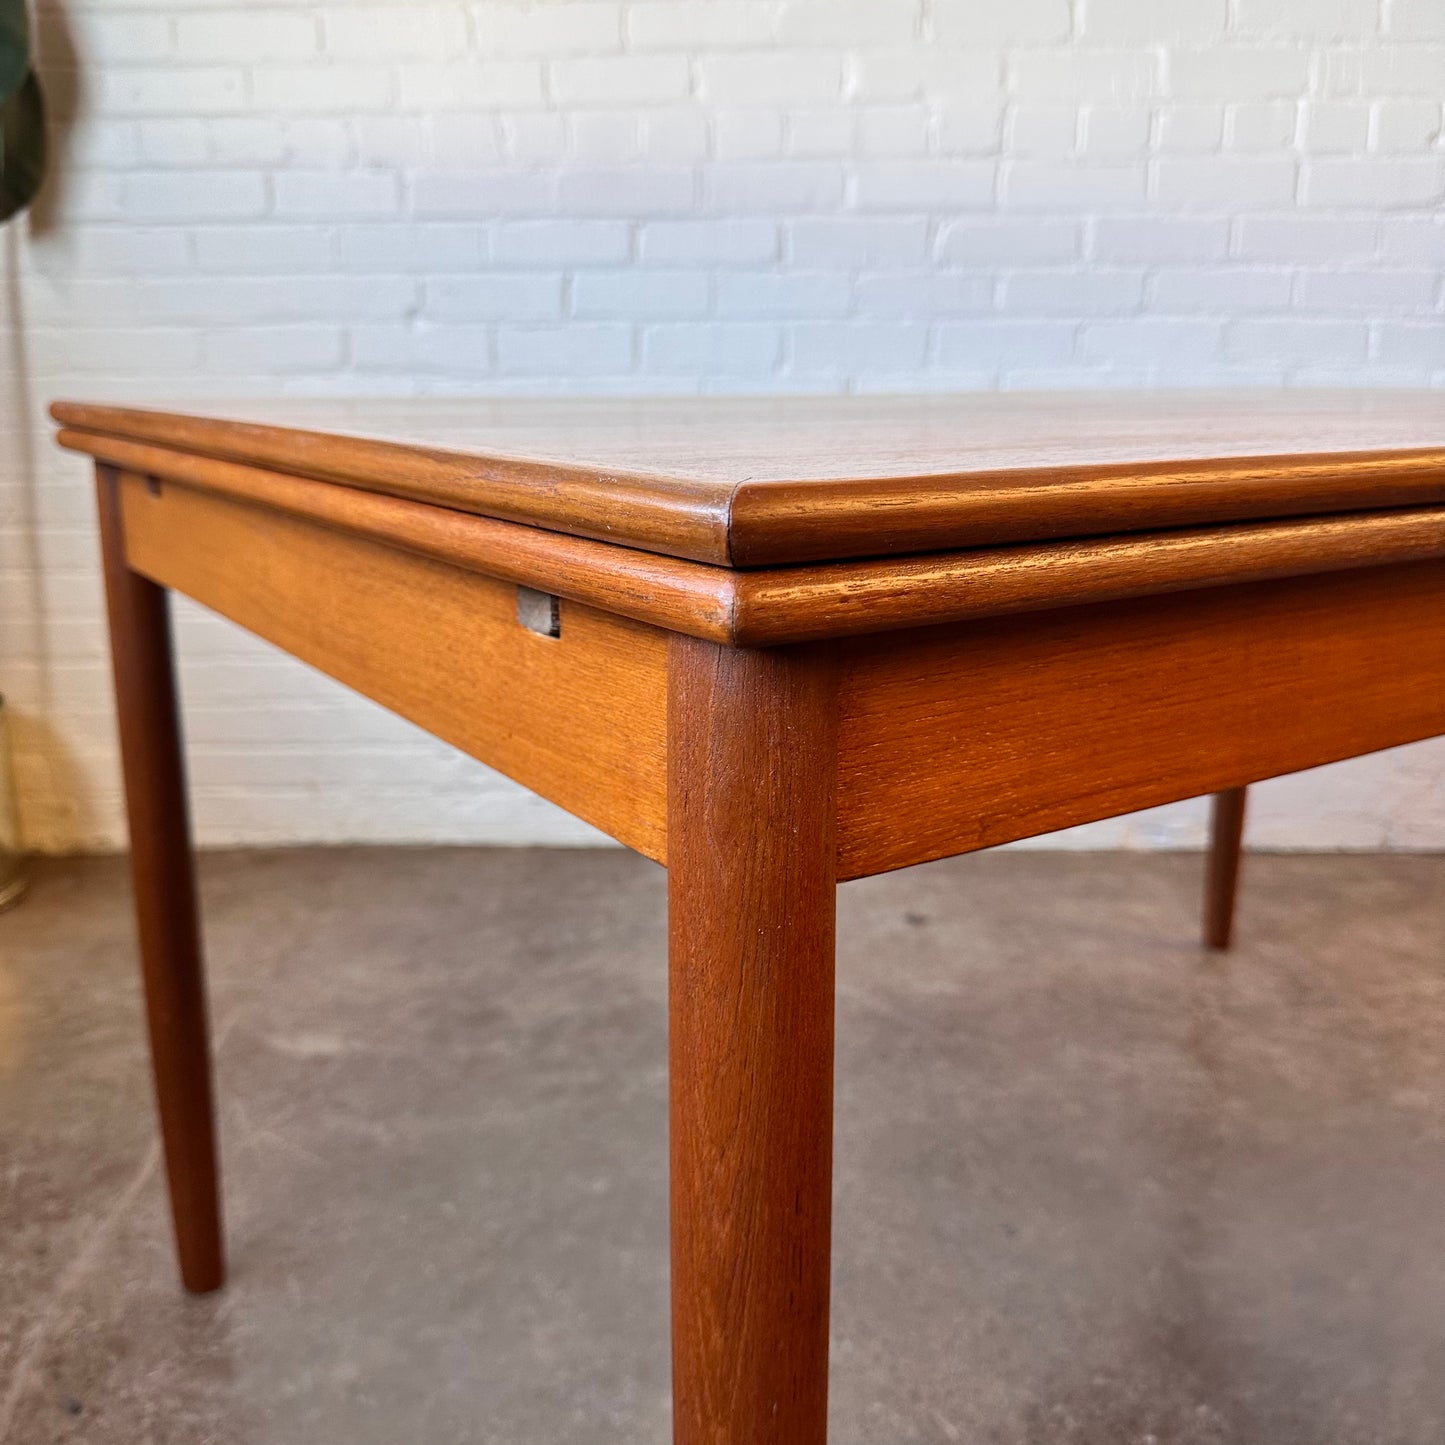 RESTORED DANISH TEAK DINING TABLE WITH DRAW LEAF